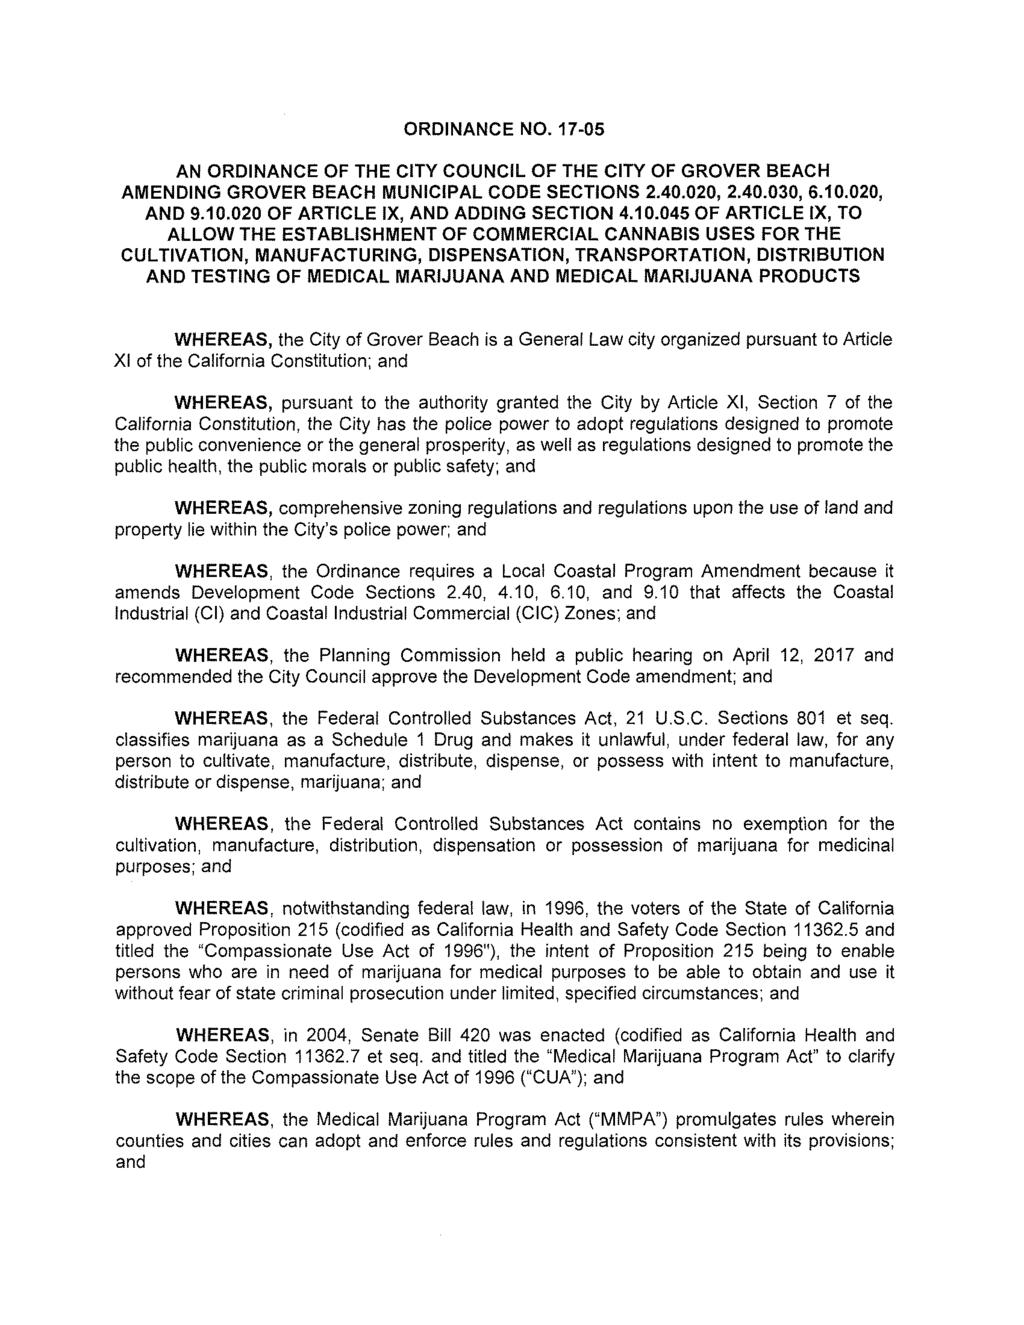 ORDINANCE NO. 17-05 AN ORDINANCE OF THE CITY COUNCIL OF THE CITY OF GROVER BEACH AMENDING GROVER BEACH MUNICIPAL CODE SECTIONS 2.40.020, 2.40.030, 6.10.020, AND 9.10.020 OF ARTICLE IX, AND ADDING SECTION 4.